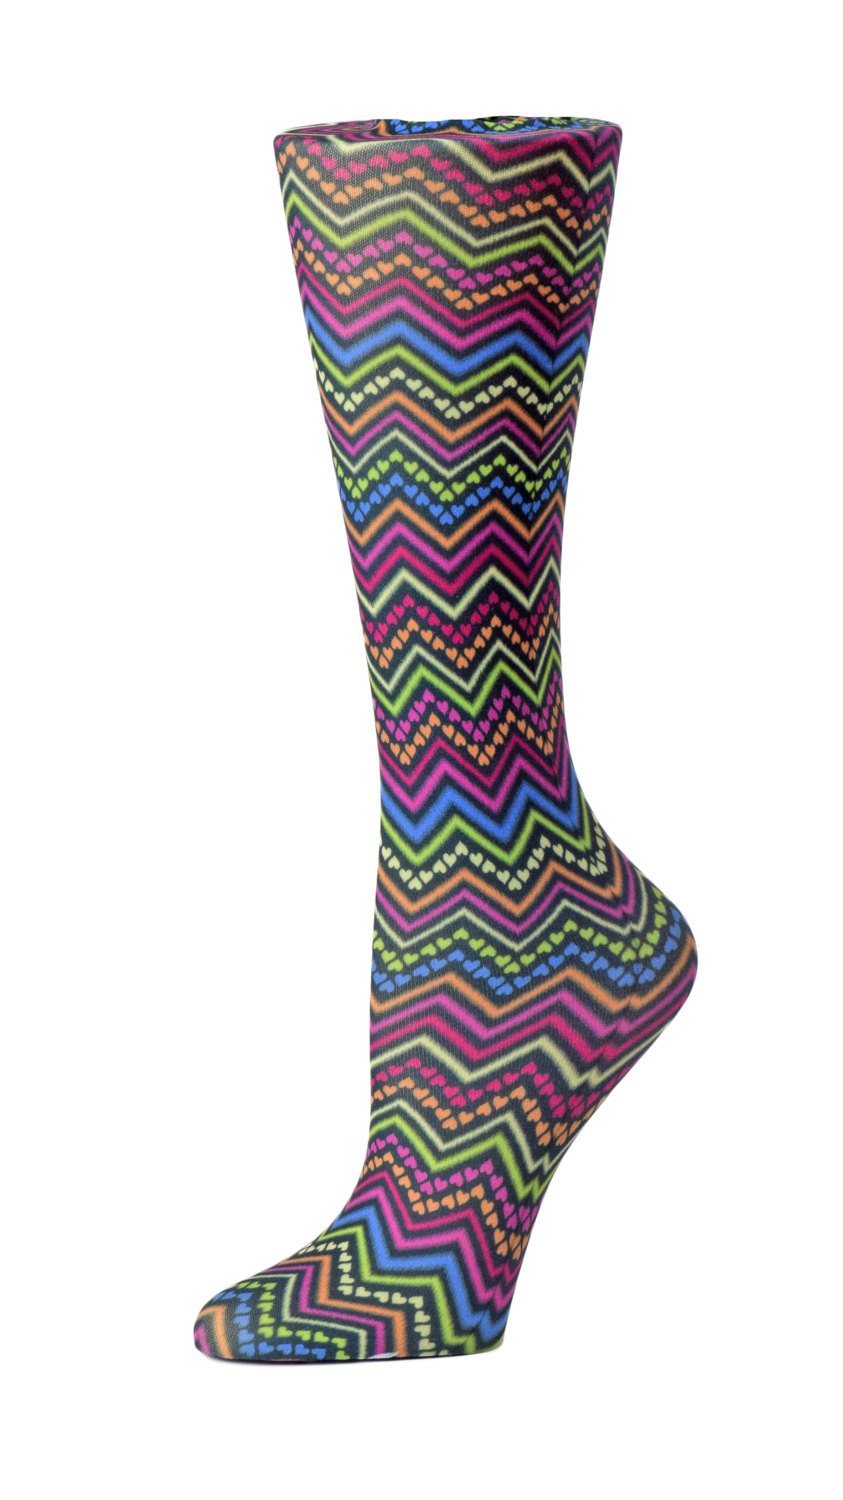 Cutieful Moderate Compression Socks 10-18 mmHg Knit in Print Patterns Izzy Hearts at Parker's Clothing and Shoes.